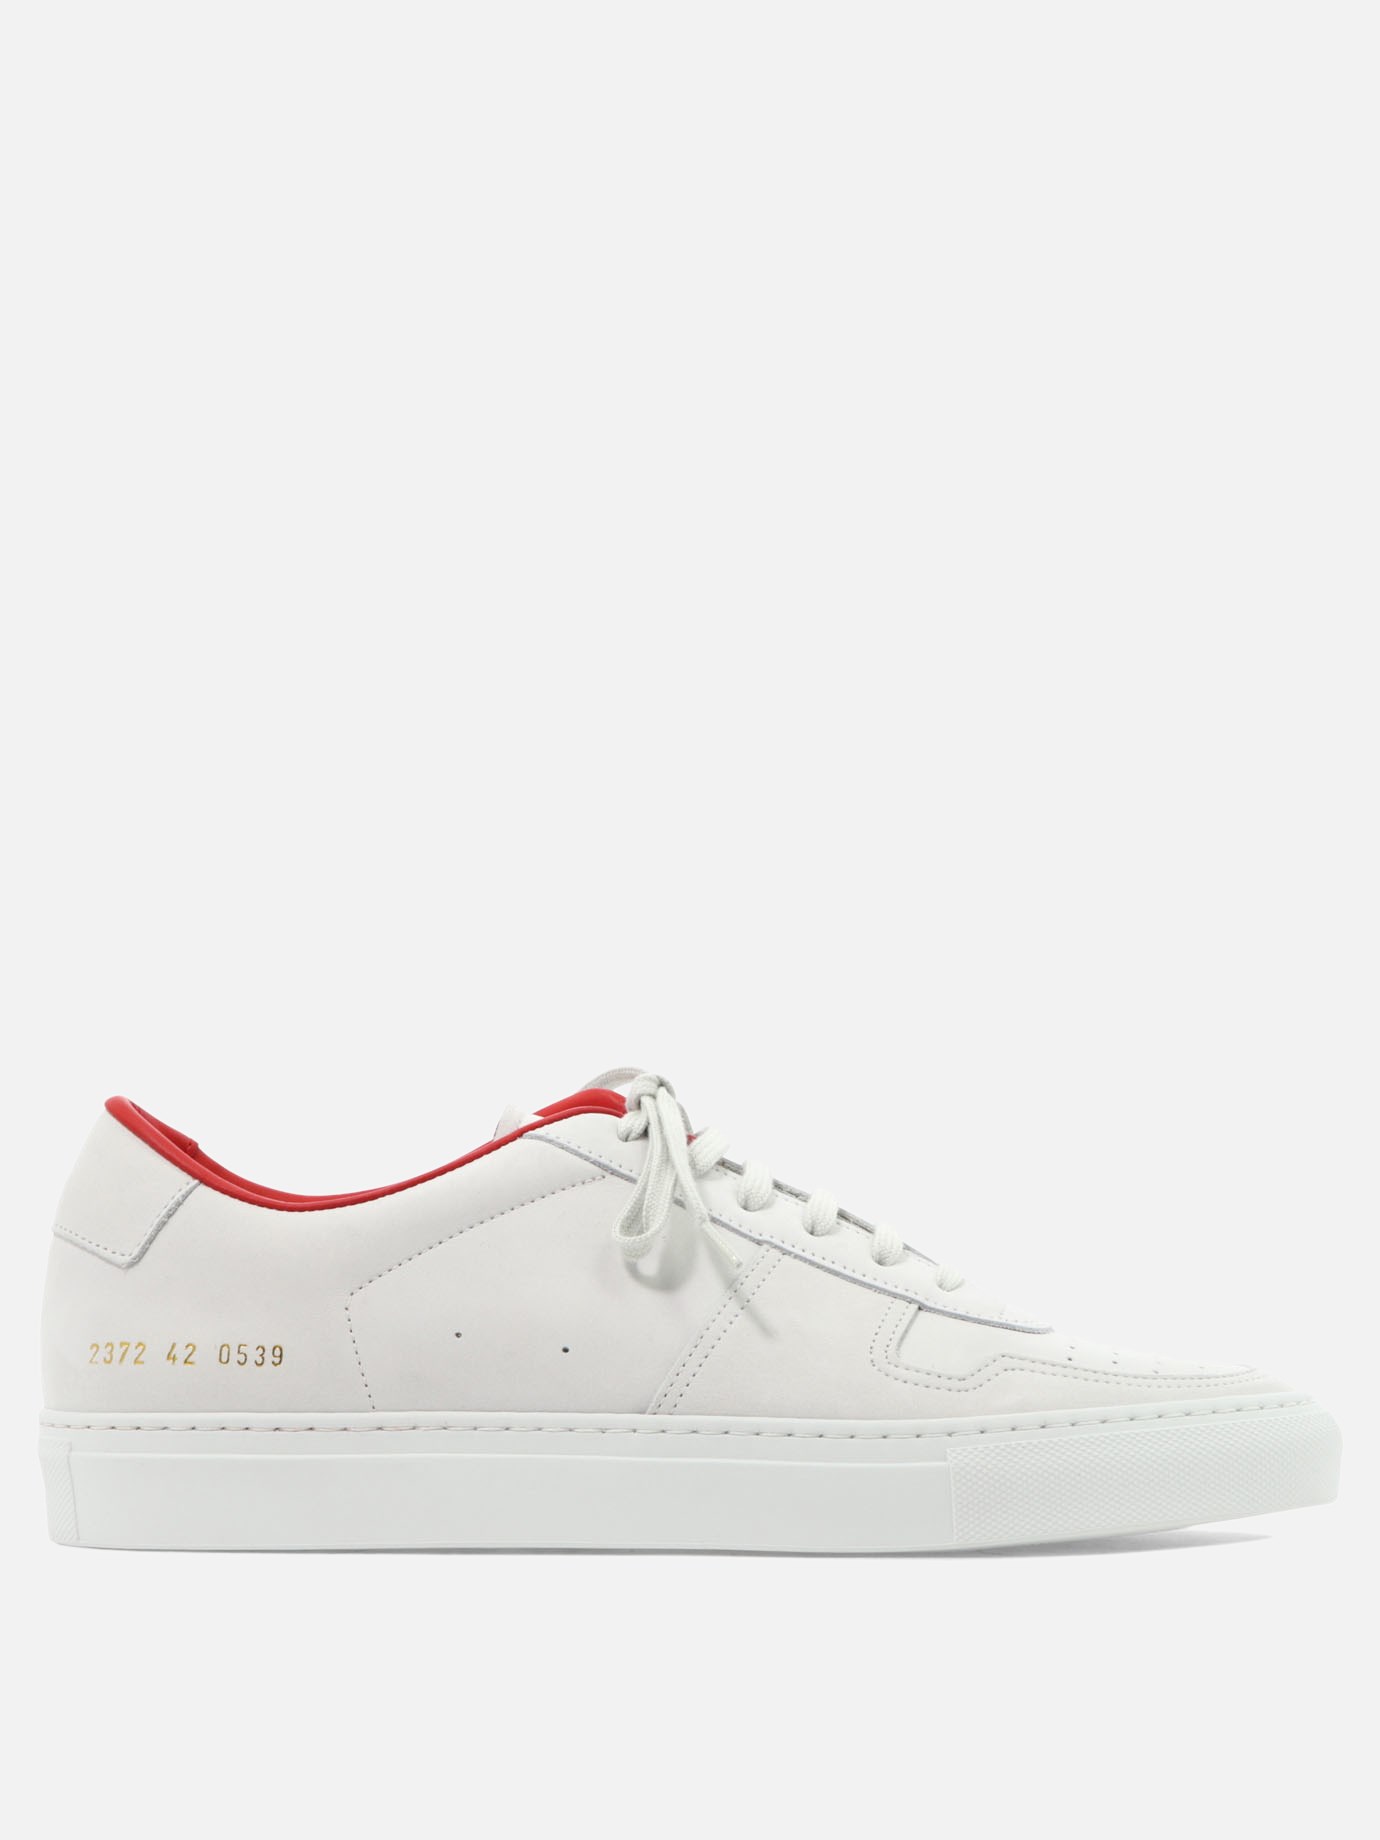 Sneaker  Bball Summer by Common Projects - 5